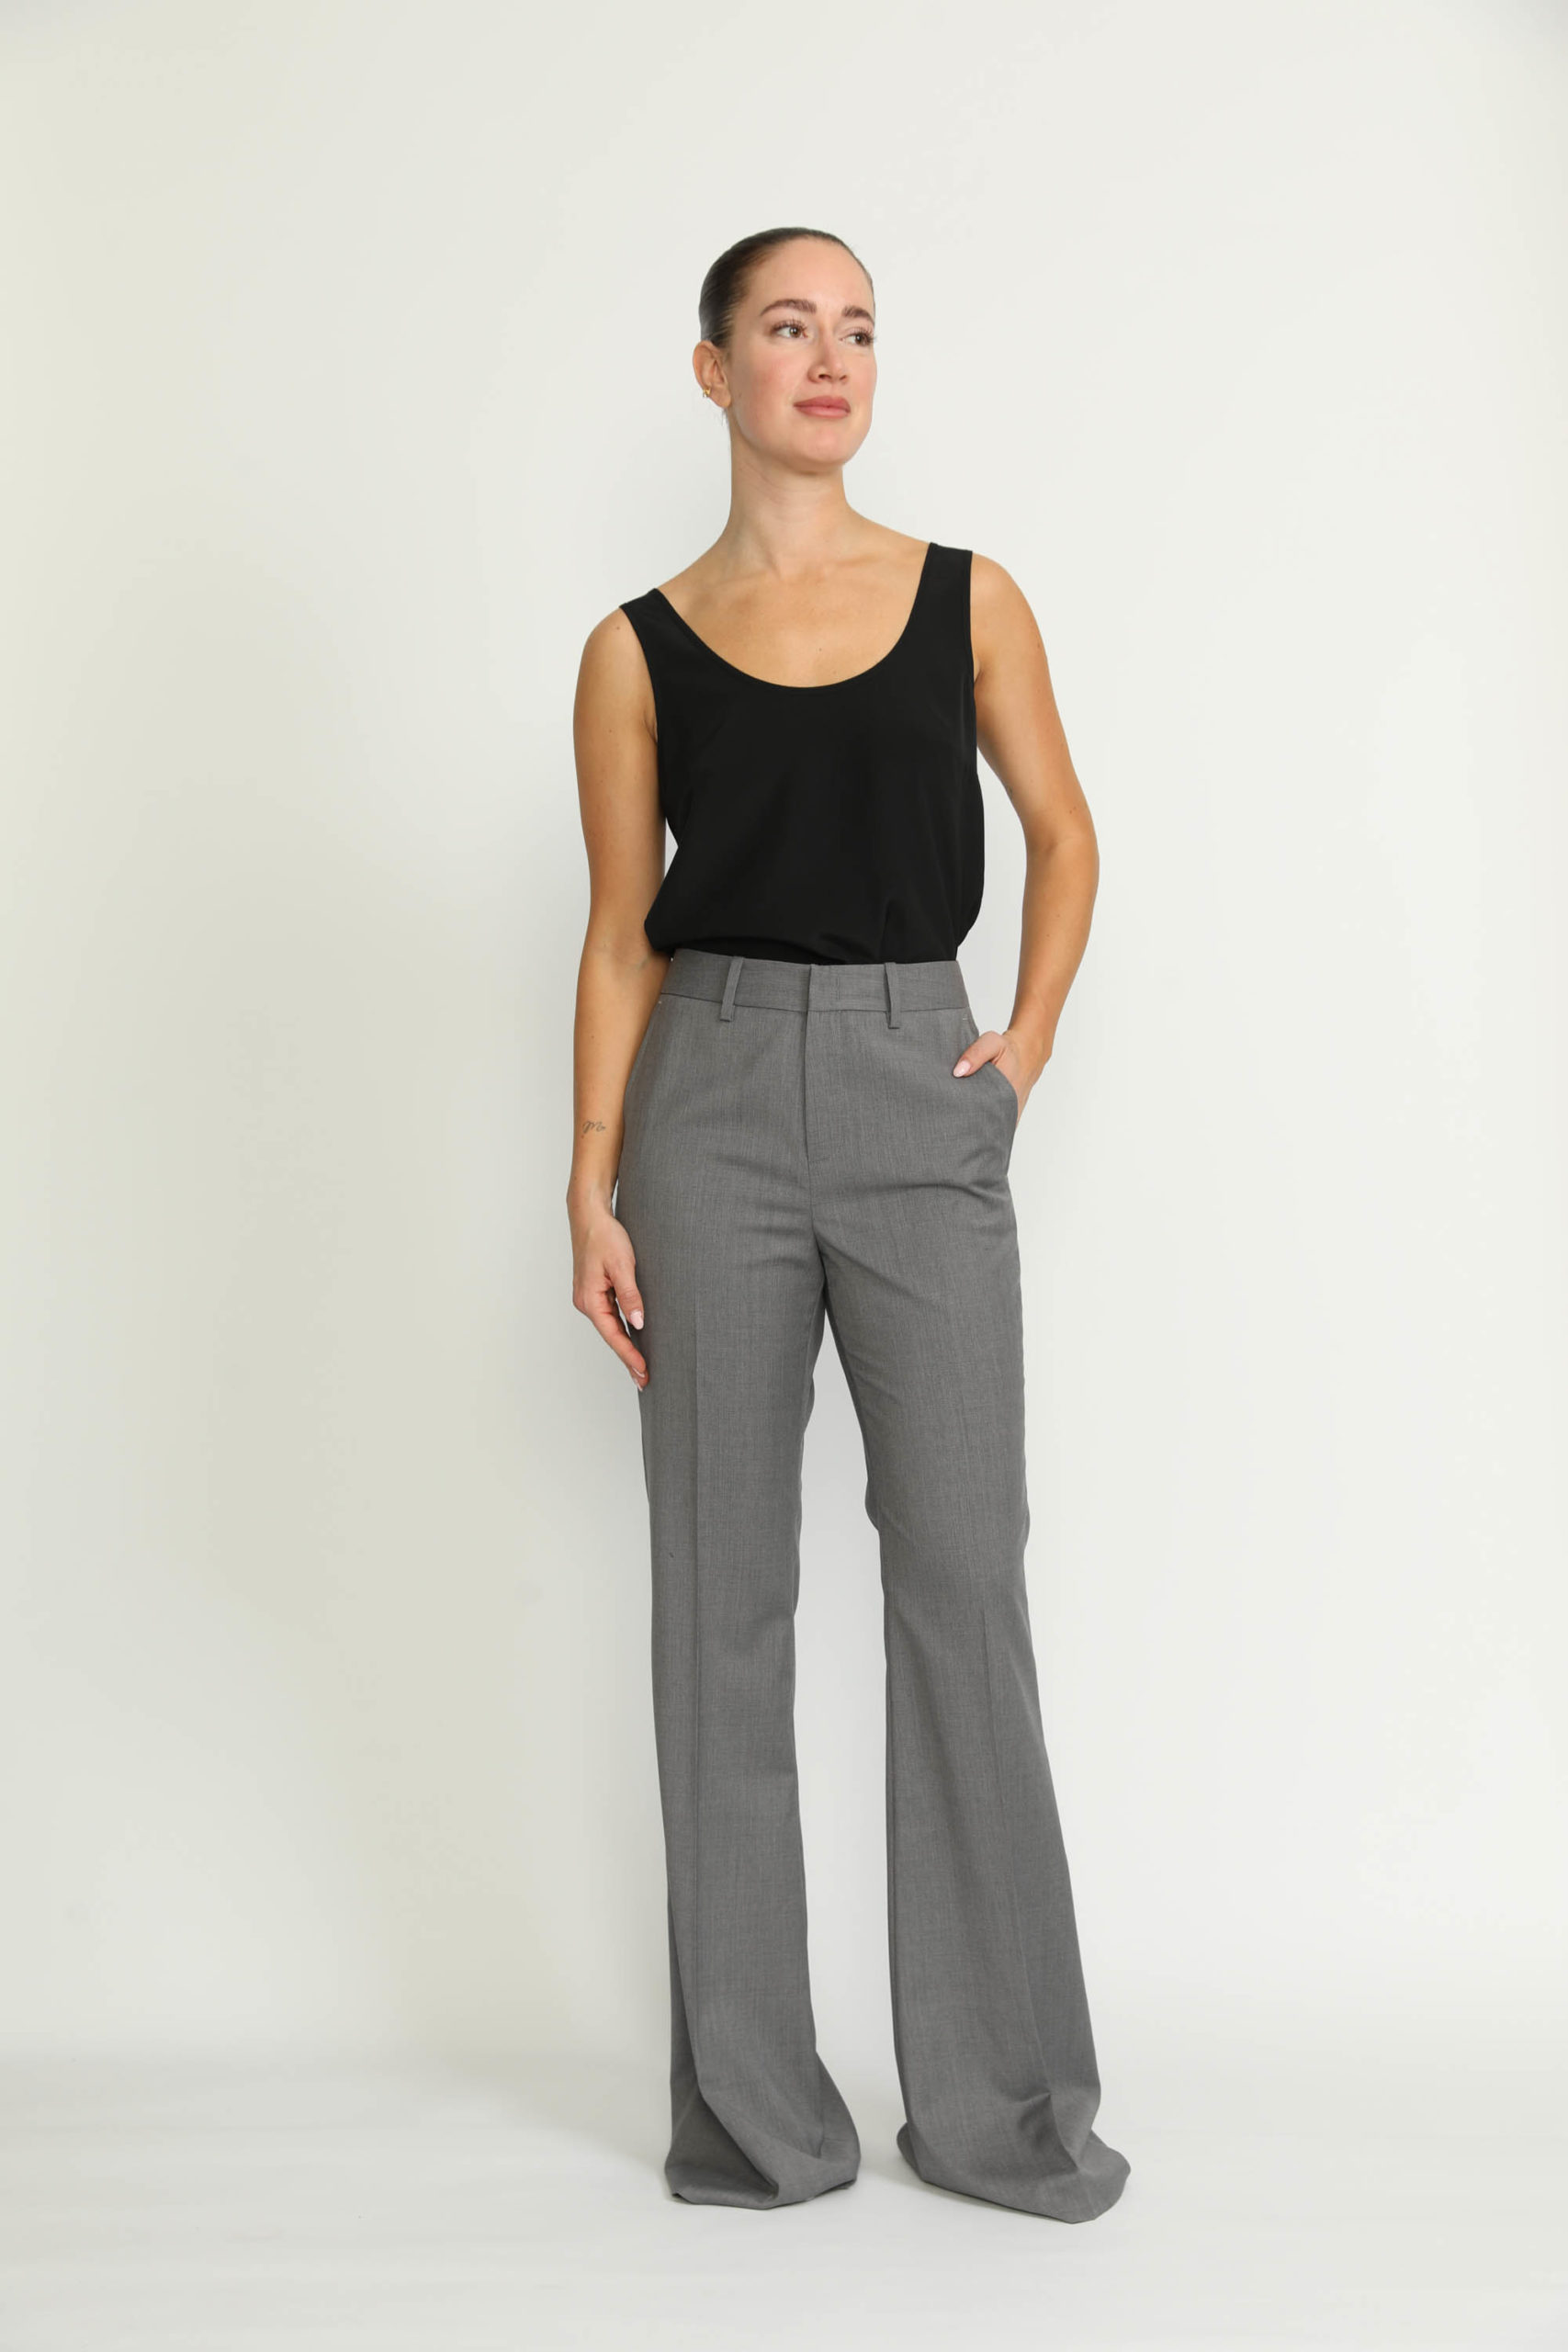 Sursee Trousers – Sursee Bell Bottom Flared Grey Trousers